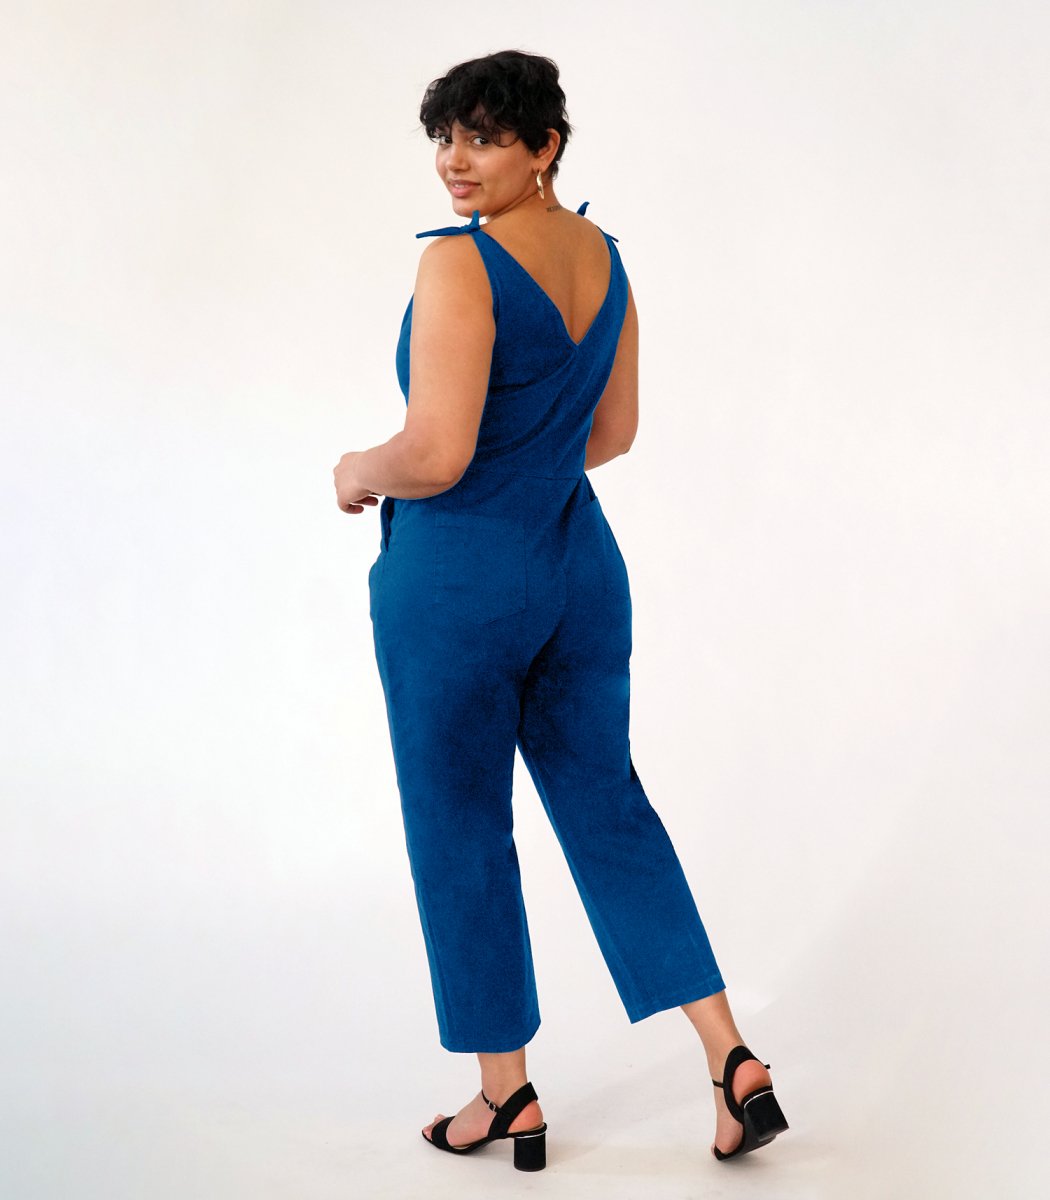 Model shows the back side of a bright blue colored jumpsuit with a V-neckline and tie up shoulder straps. The Slate Overalls in Royal are designed by Loup and made in New York City, USA.